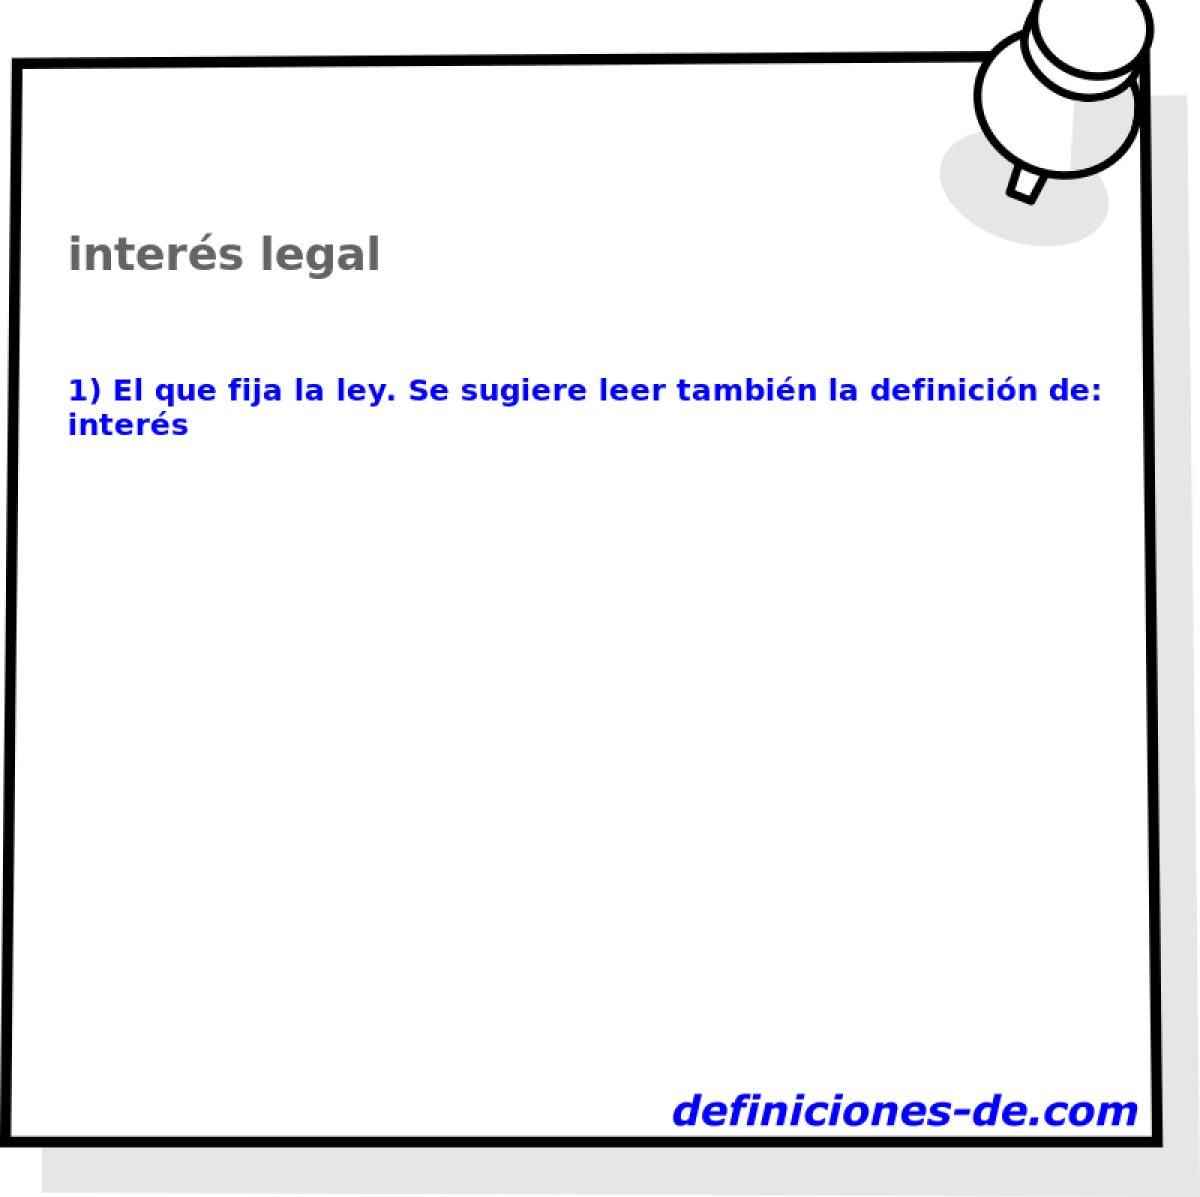 inters legal 